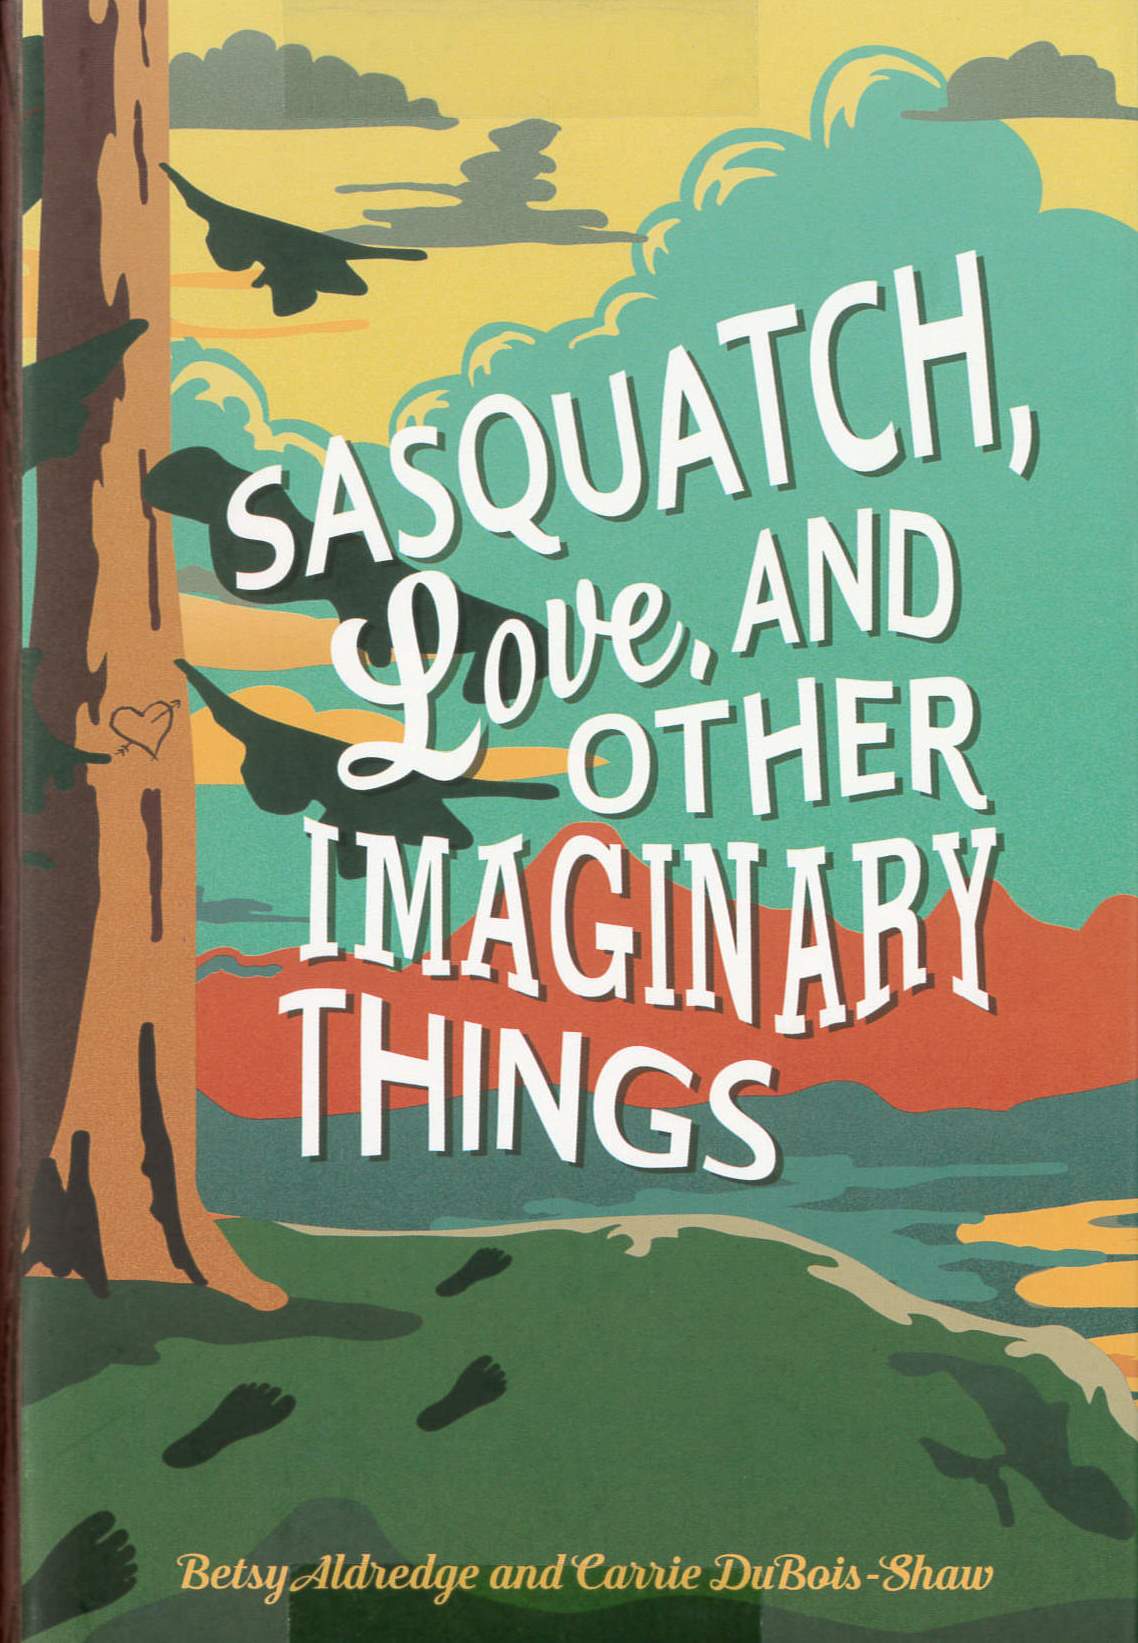 Sasquatch, love, and other imaginary things /